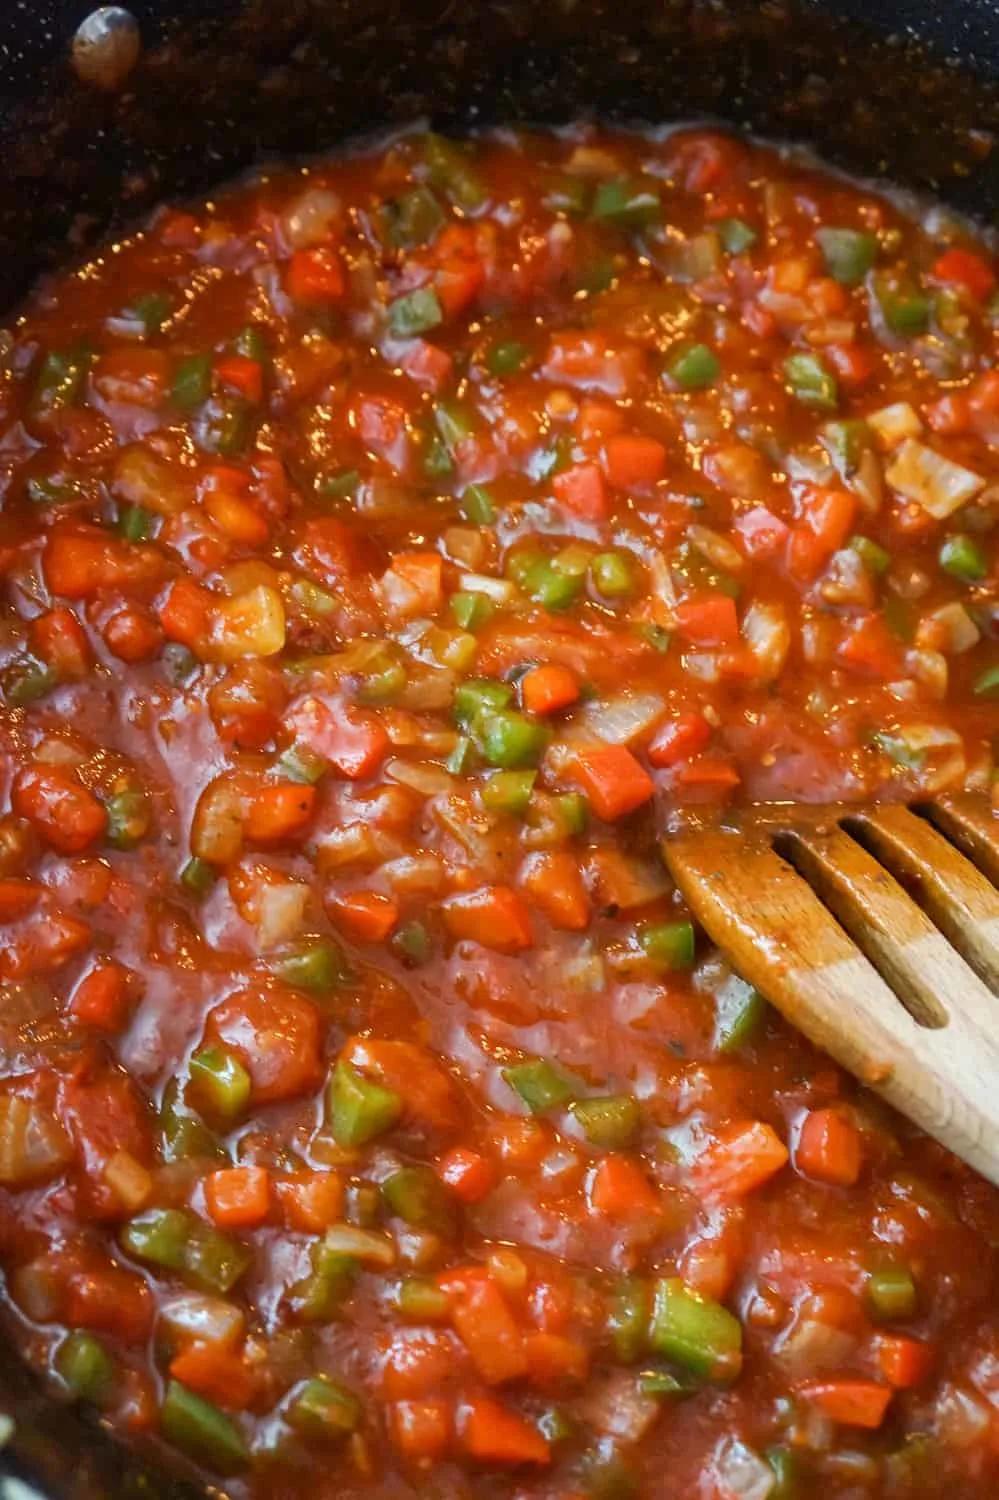 marinara sauce and diced peppers in a saute pan